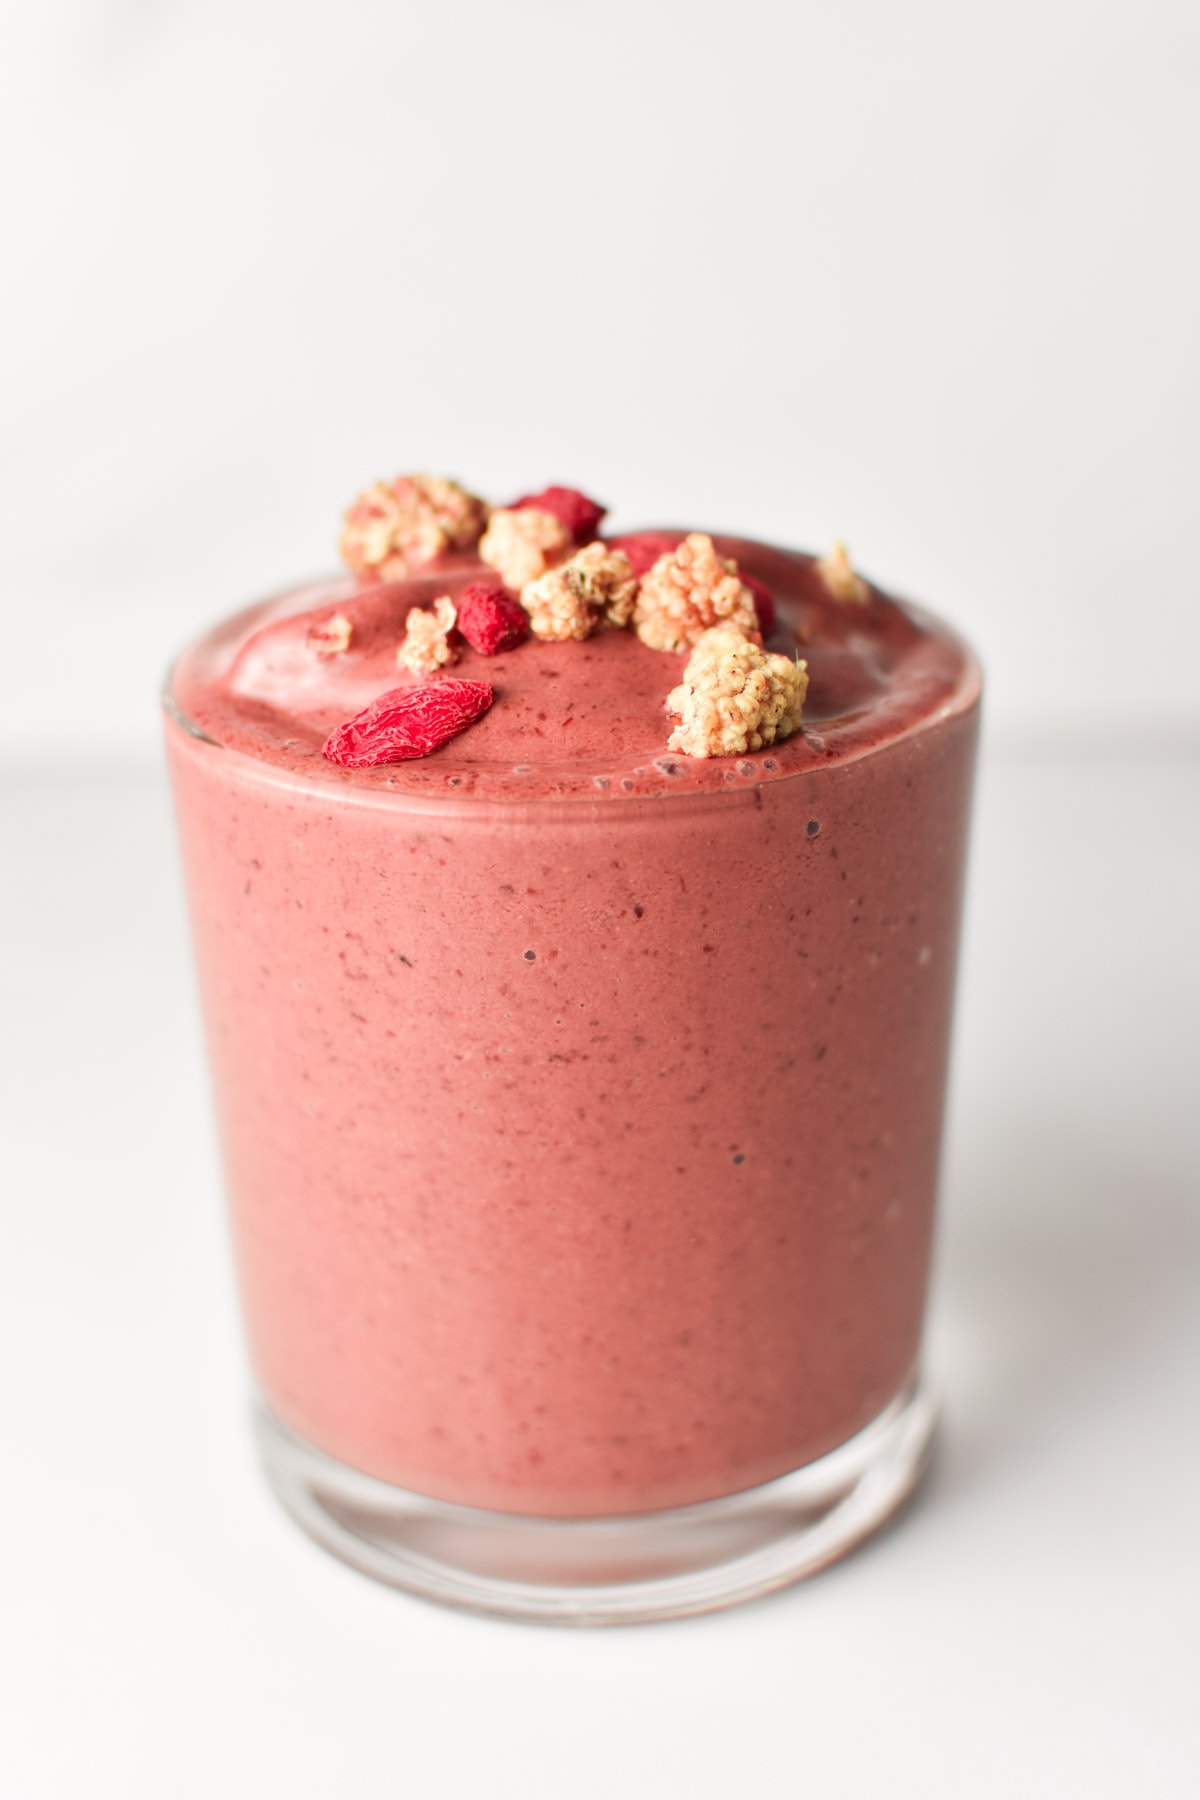 A cherry smoothie in a glass topped with mulberries.